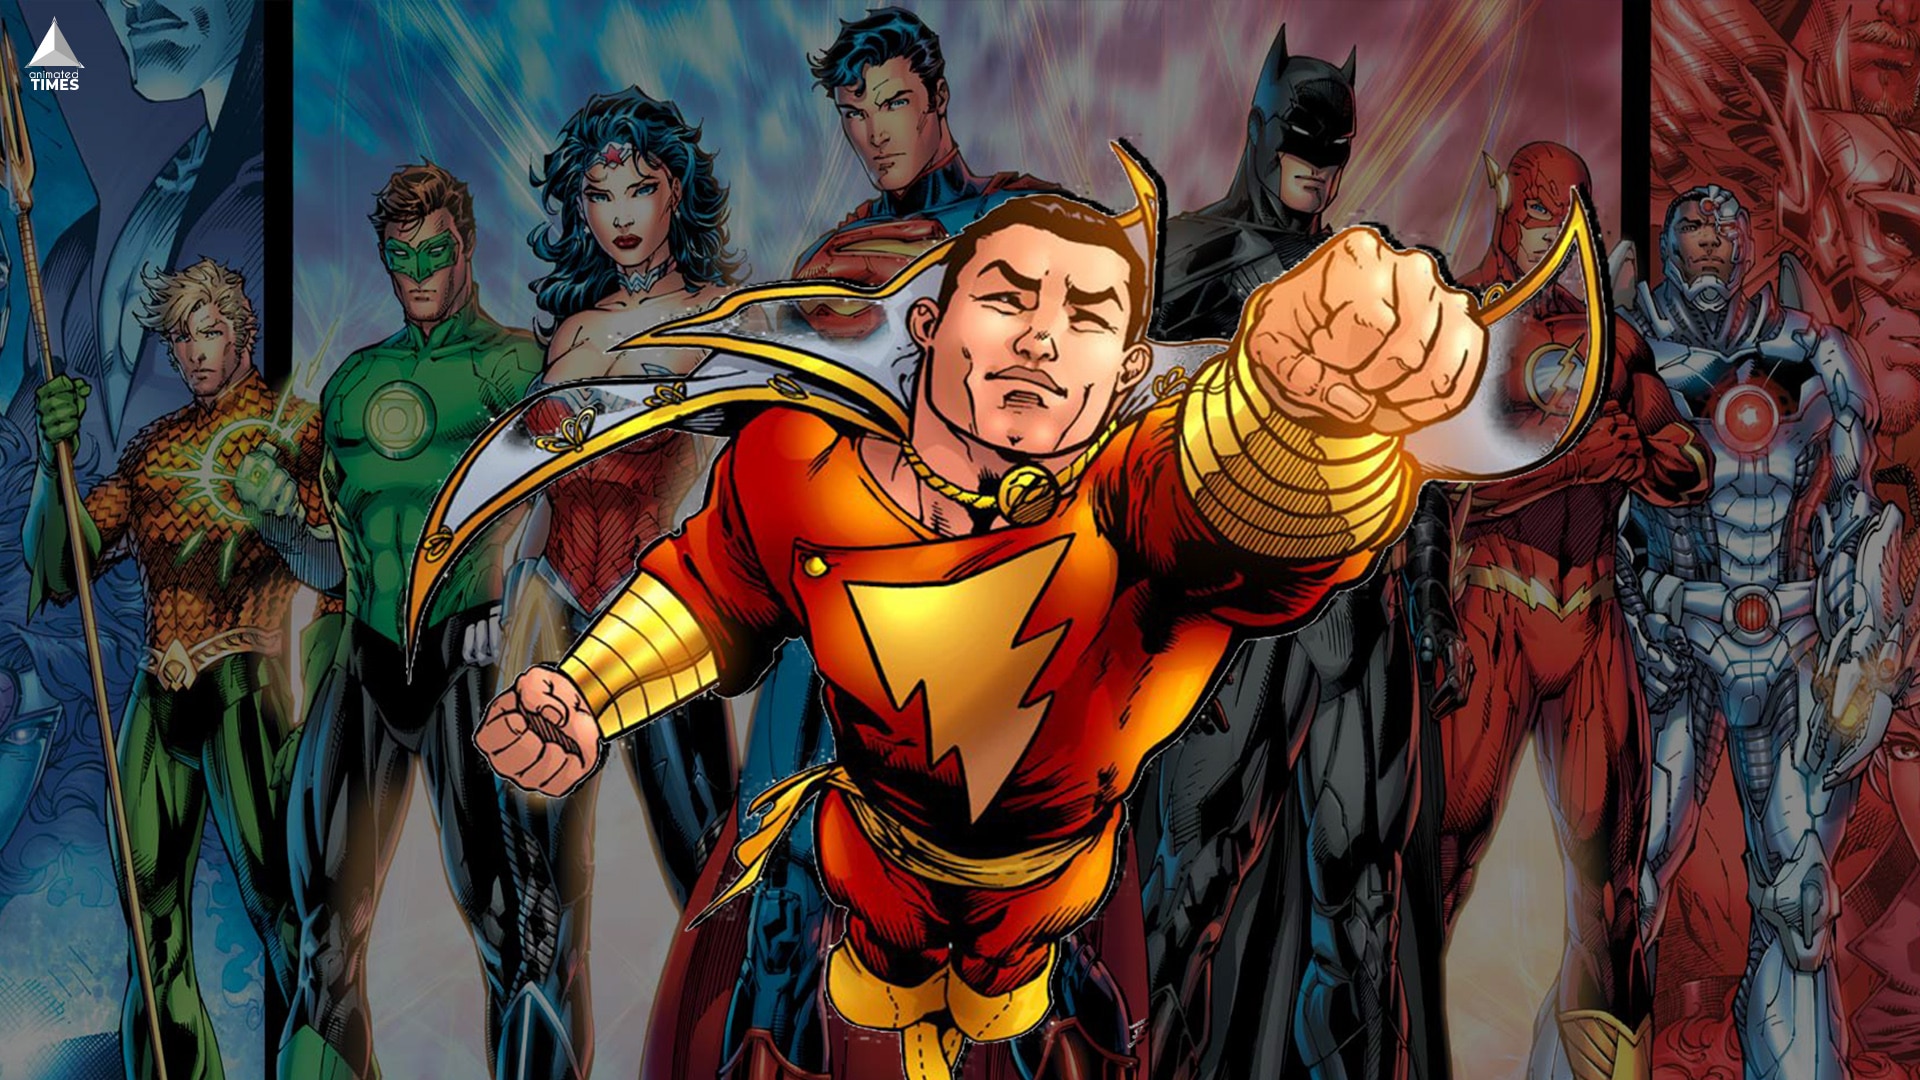 Shazam! Wise With Wisdom: Justice League’s Smartest Member?